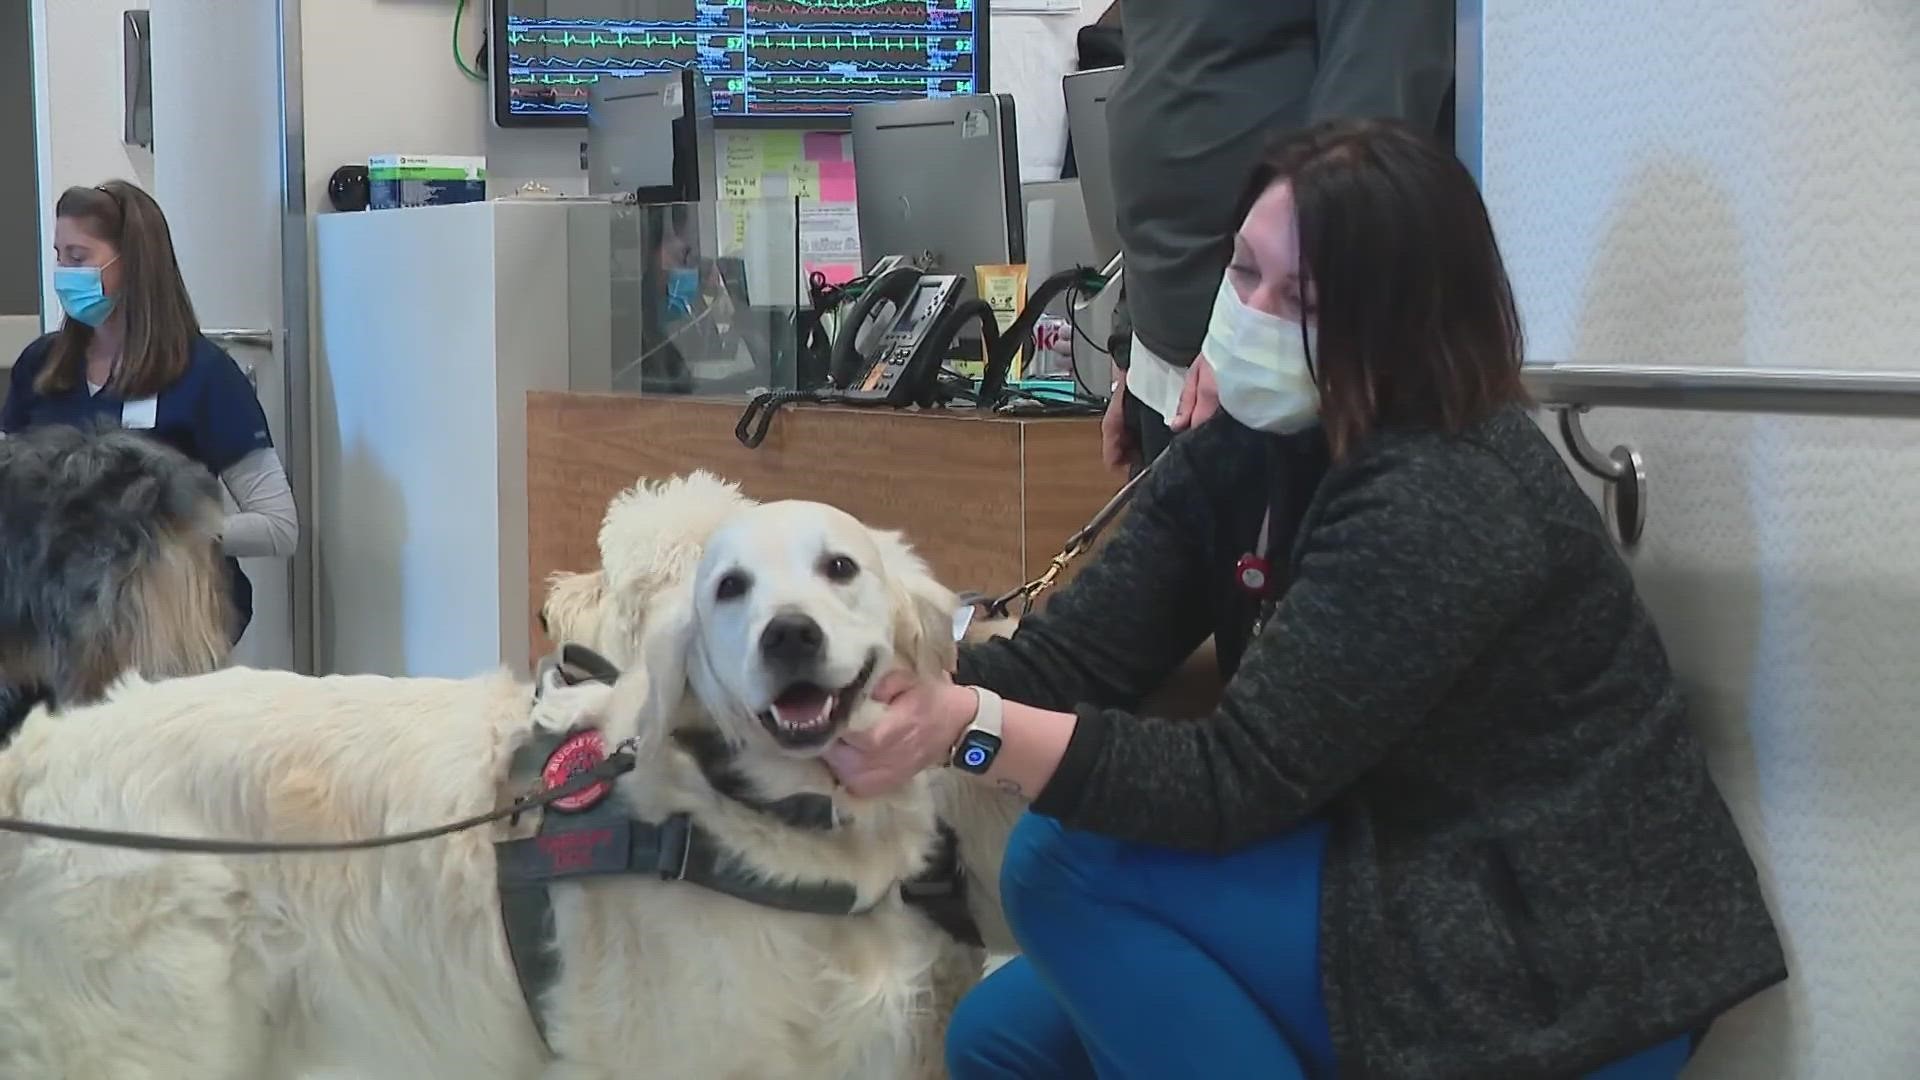 Buckeye Paws was started at the Ohio State Wexner Medical Center in March 2020 to help reduce stress and anxiety among hospital staff.